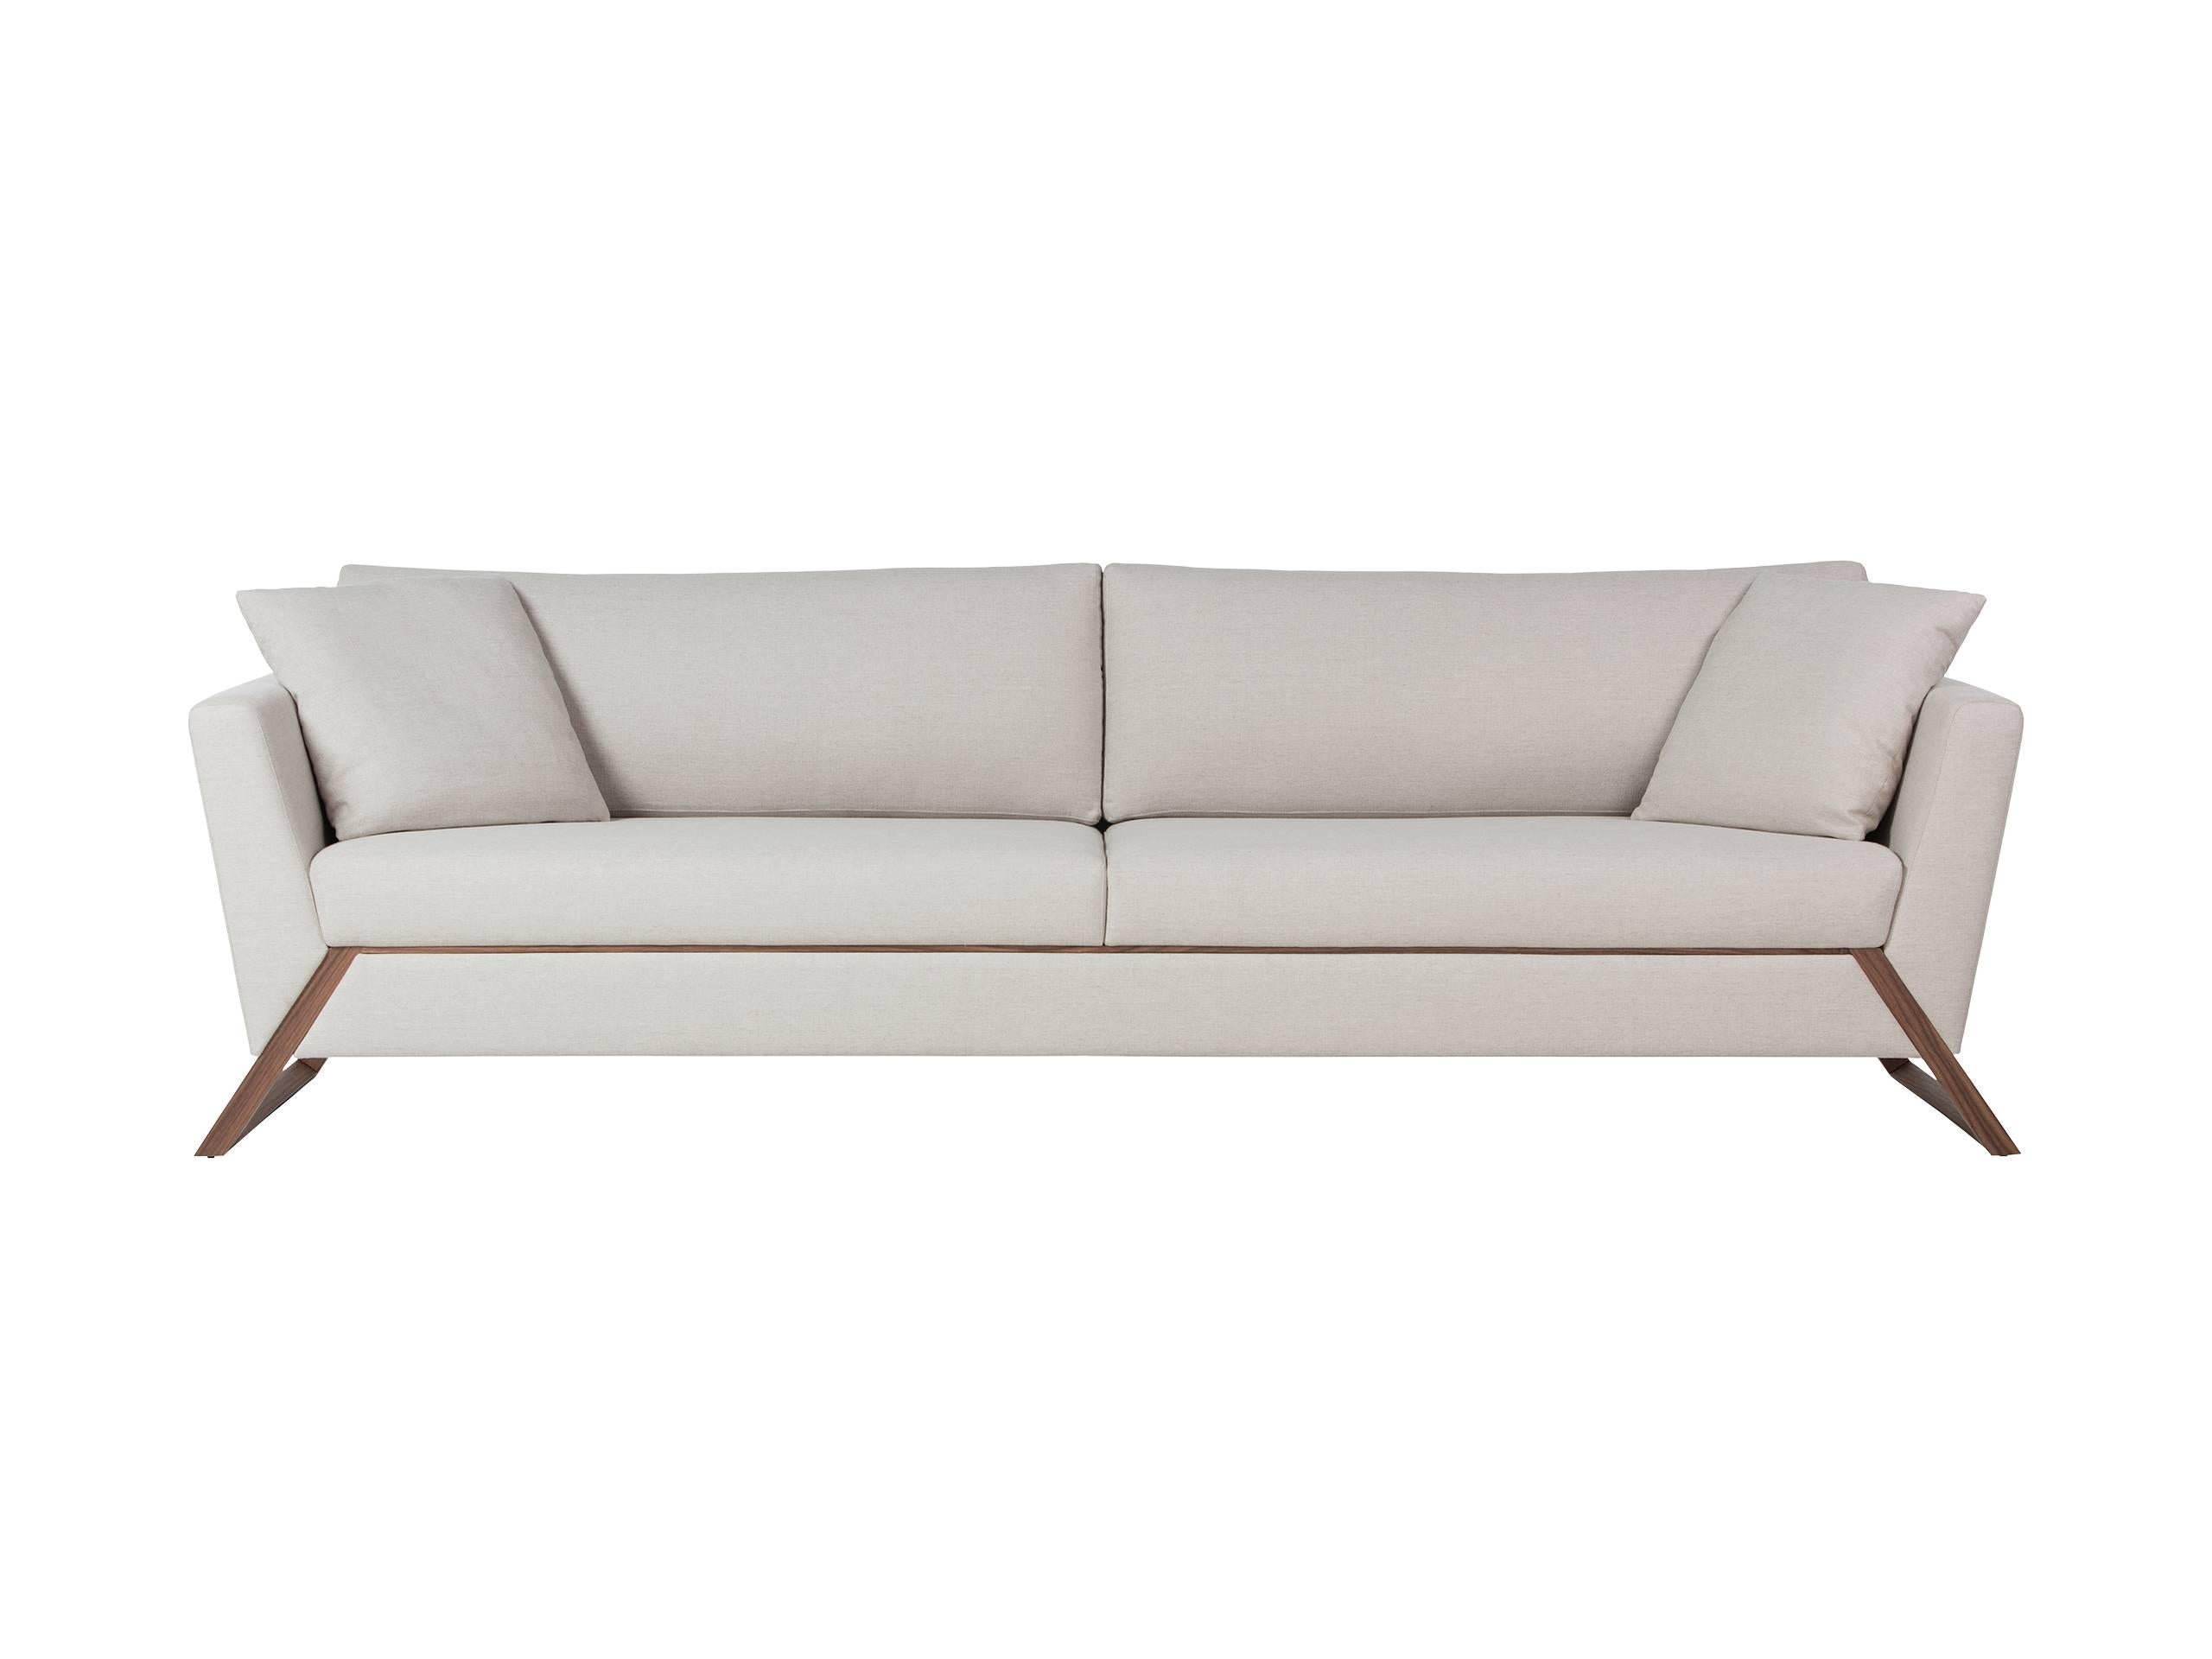 The proposition for this piece is to leave exposed some components of the wooden structure, reinforcing a characteristic already established in Lattoog´s projects for sofas.
This piece, with very contemporary and dashing lines, shows the designers